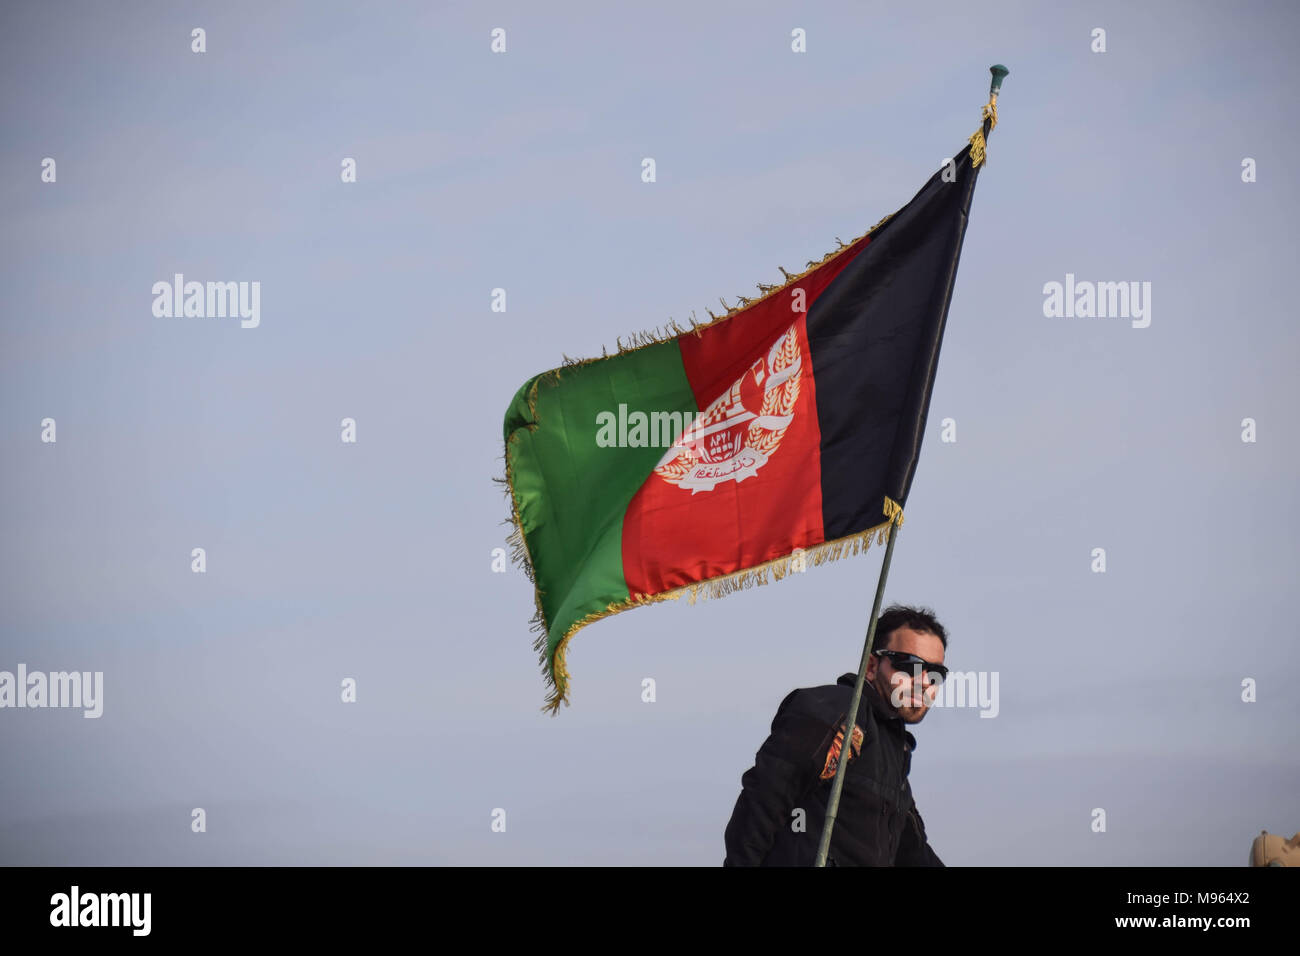 Afghan Commando beneath an Afghan national flag in Shindand Military Base, Herat province. Afghanistan’s elite military forces – the Commandos and the Special Forces are one of the key elements in the Afghan and U.S. strategy to turn the grinding fight against the Taliban and other insurgents around. These pictures show the Commandos and Special Forces during training and in the field; also right before and after an operation in the restive western Afghan province of Farah. Stock Photo